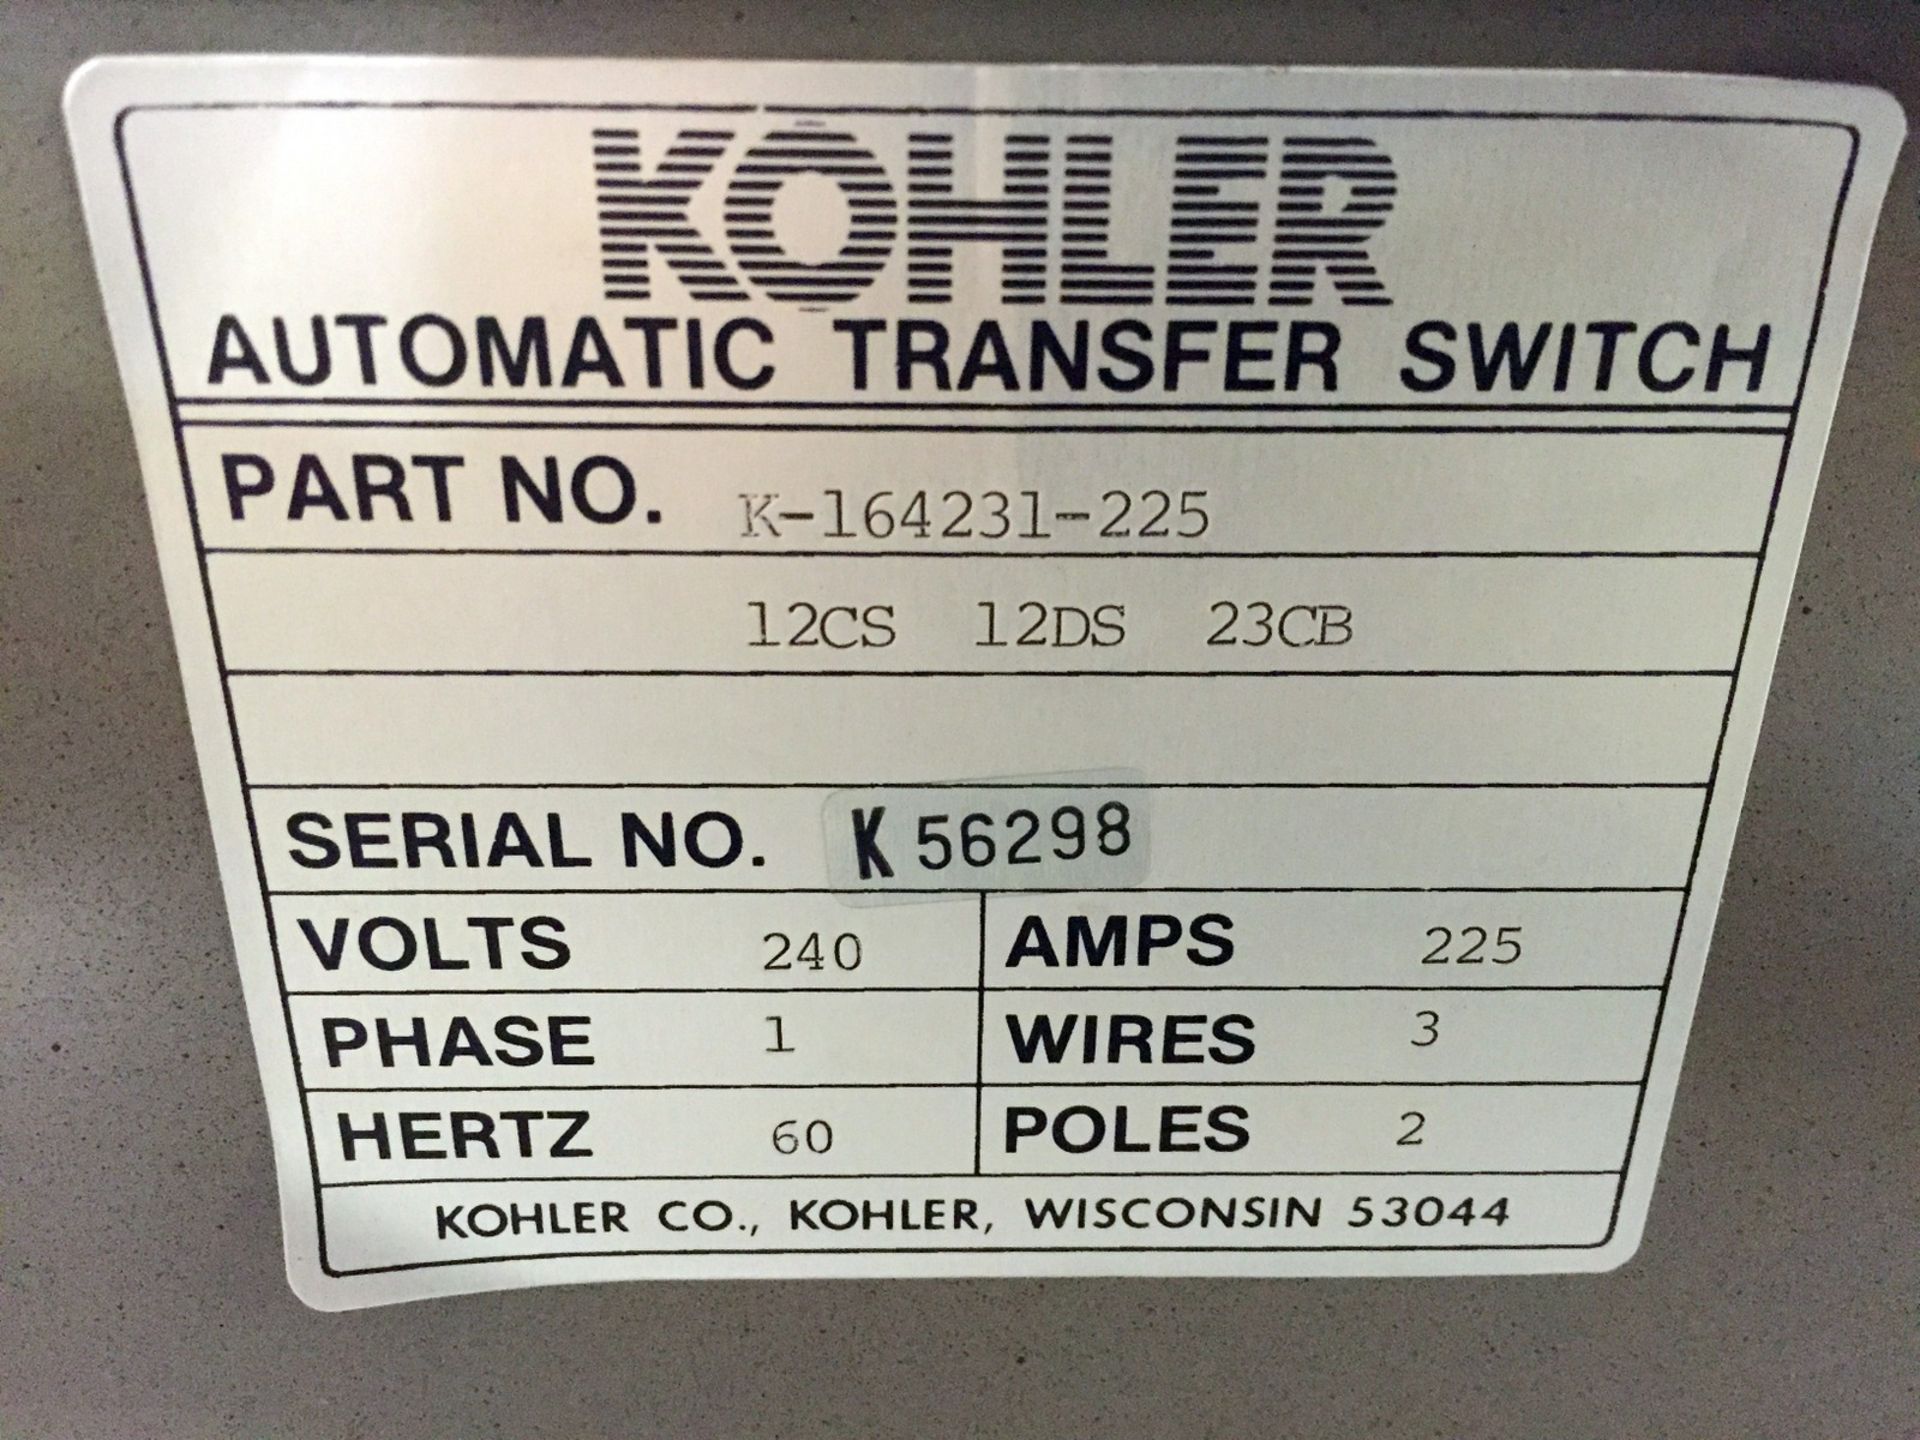 Kohler Mdl. K-164231-225 Automatic Transfer Switch, 225Amp, 240V, Single Phase (This Lot is - Image 7 of 7